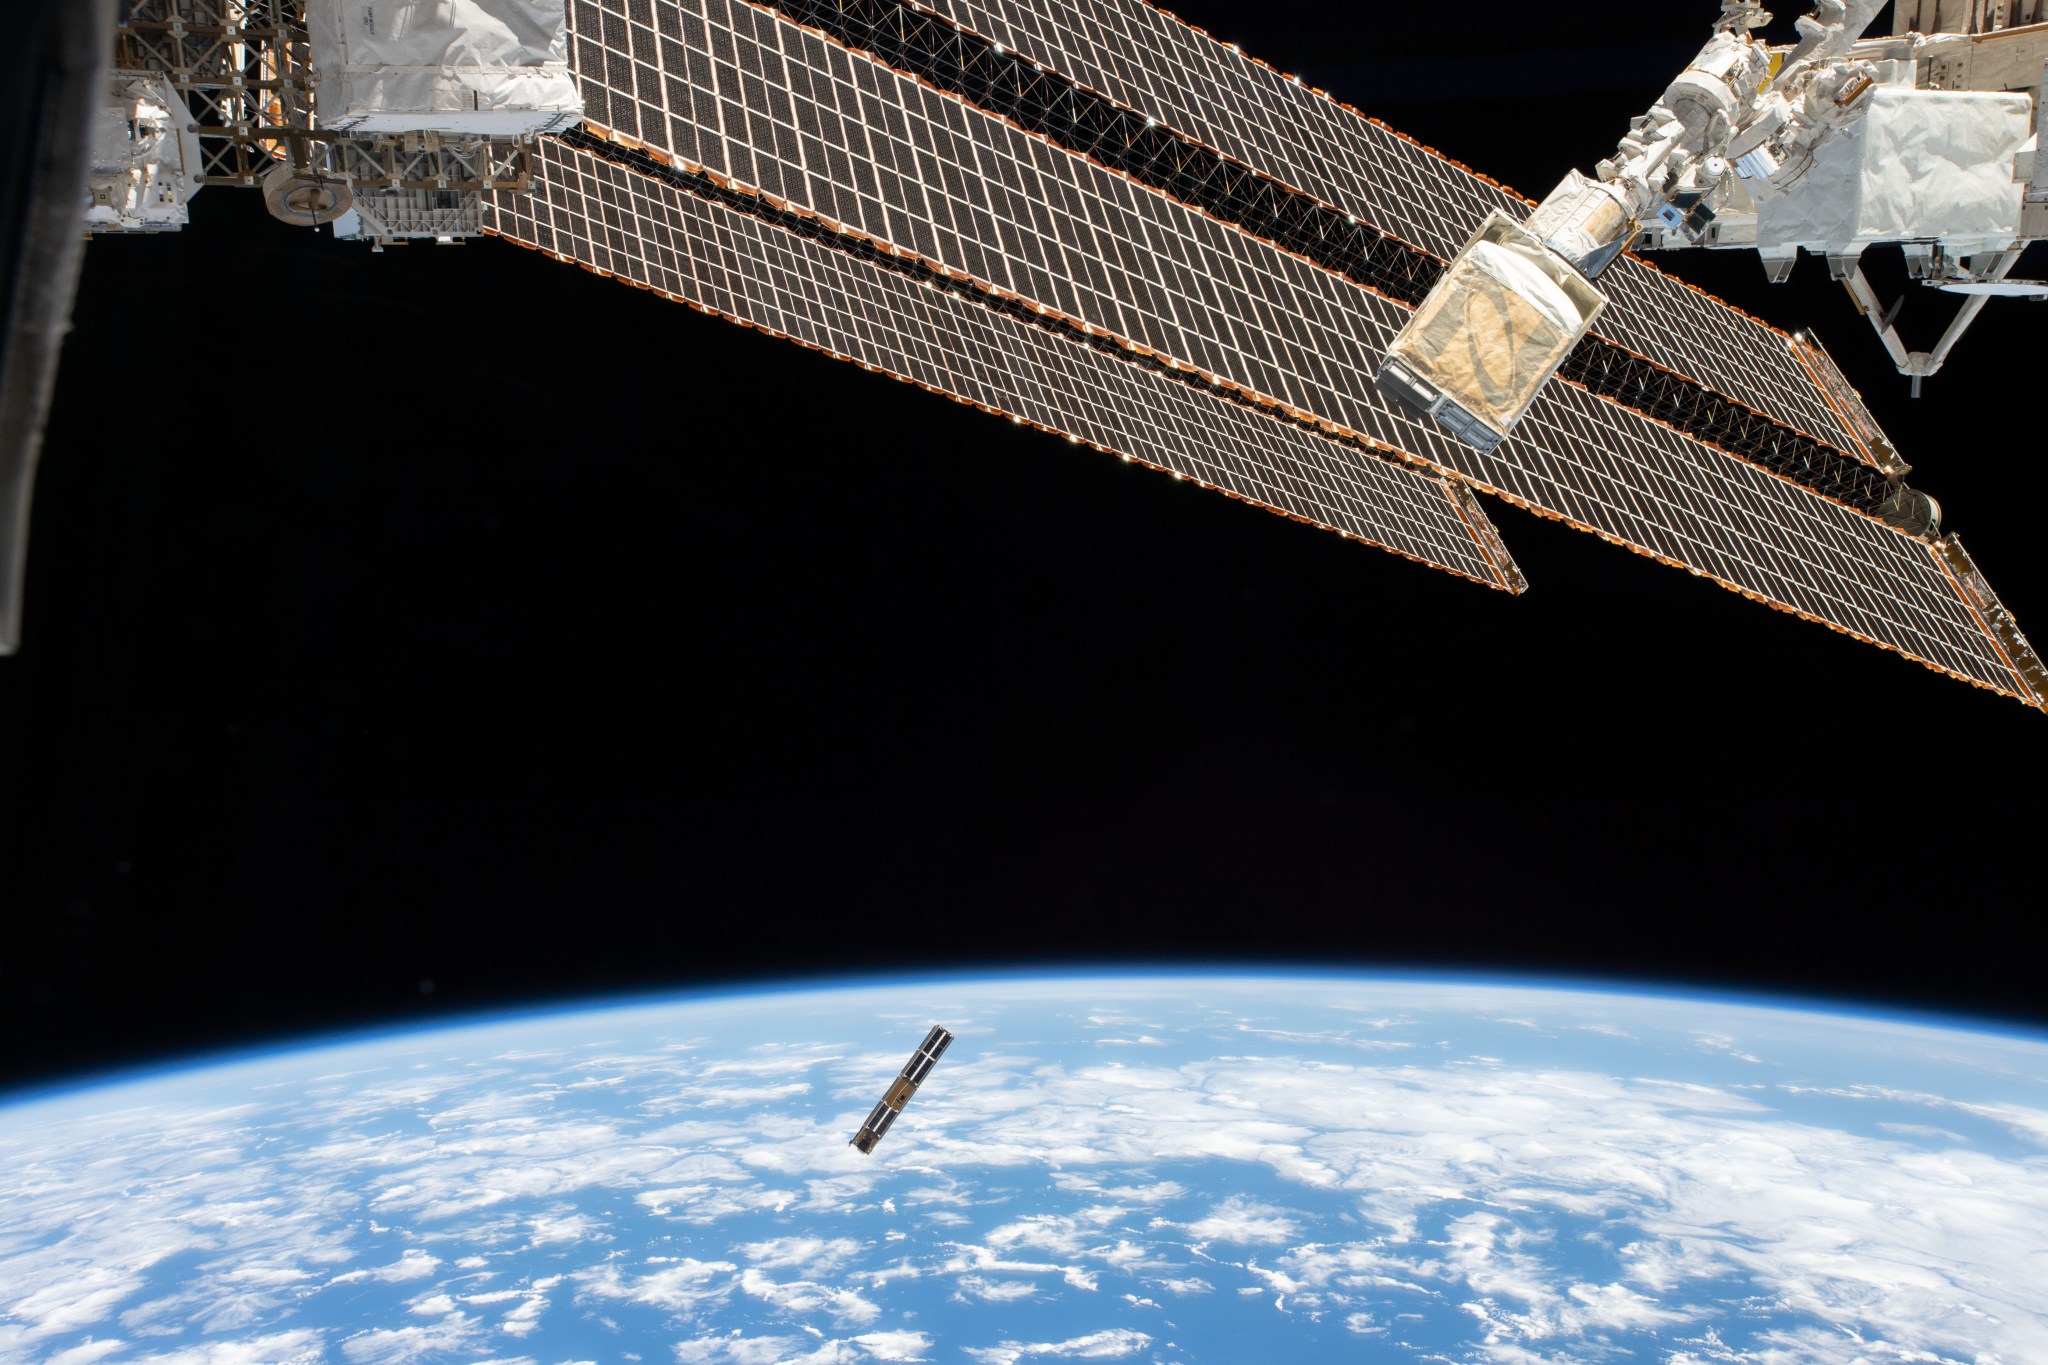 View of a long, narrow satellite in space, with the curve of Earth behind. Solar panels of the International Space Station are visible in the top half of the photo.